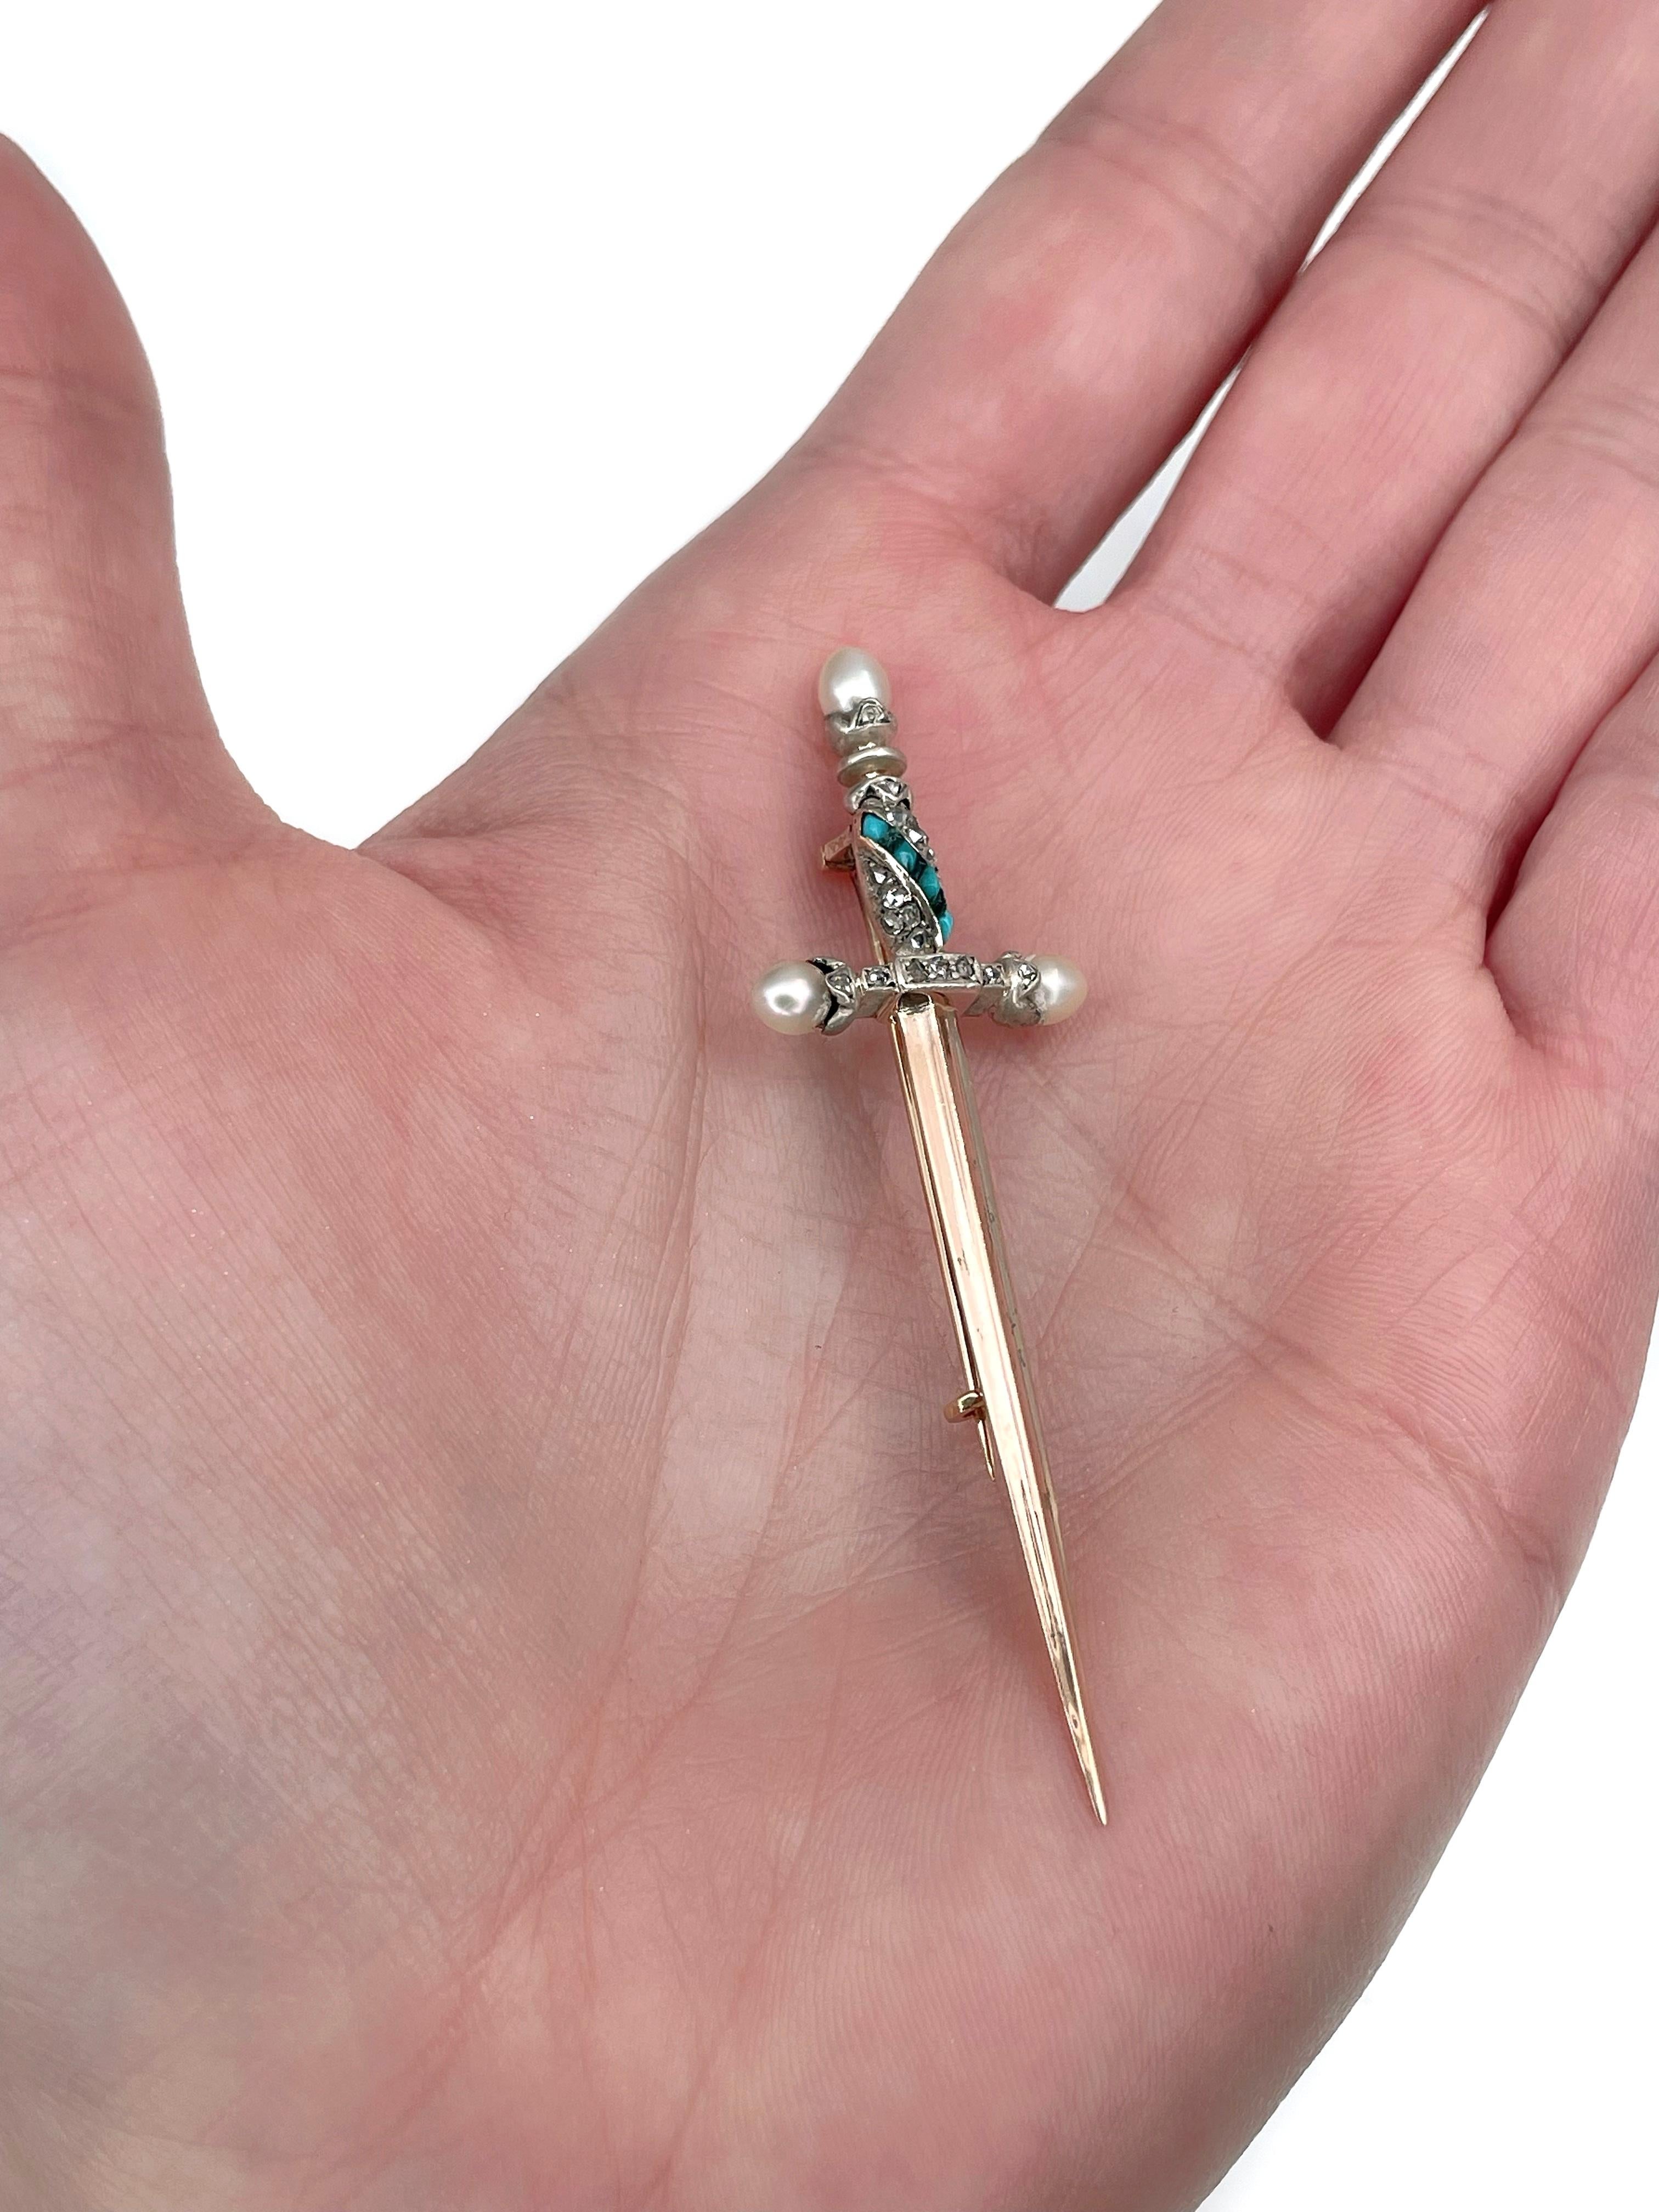 This is a Victorian bejewelled sword pin brooch. It is crafted in 18K gold. Circa 1890.

The piece features rose cut diamonds, pearls and turquoises. 

Has a C clasp. 

Weight: 4.52g
Size: 6.5x2cm

———

If you have any questions, please feel free to